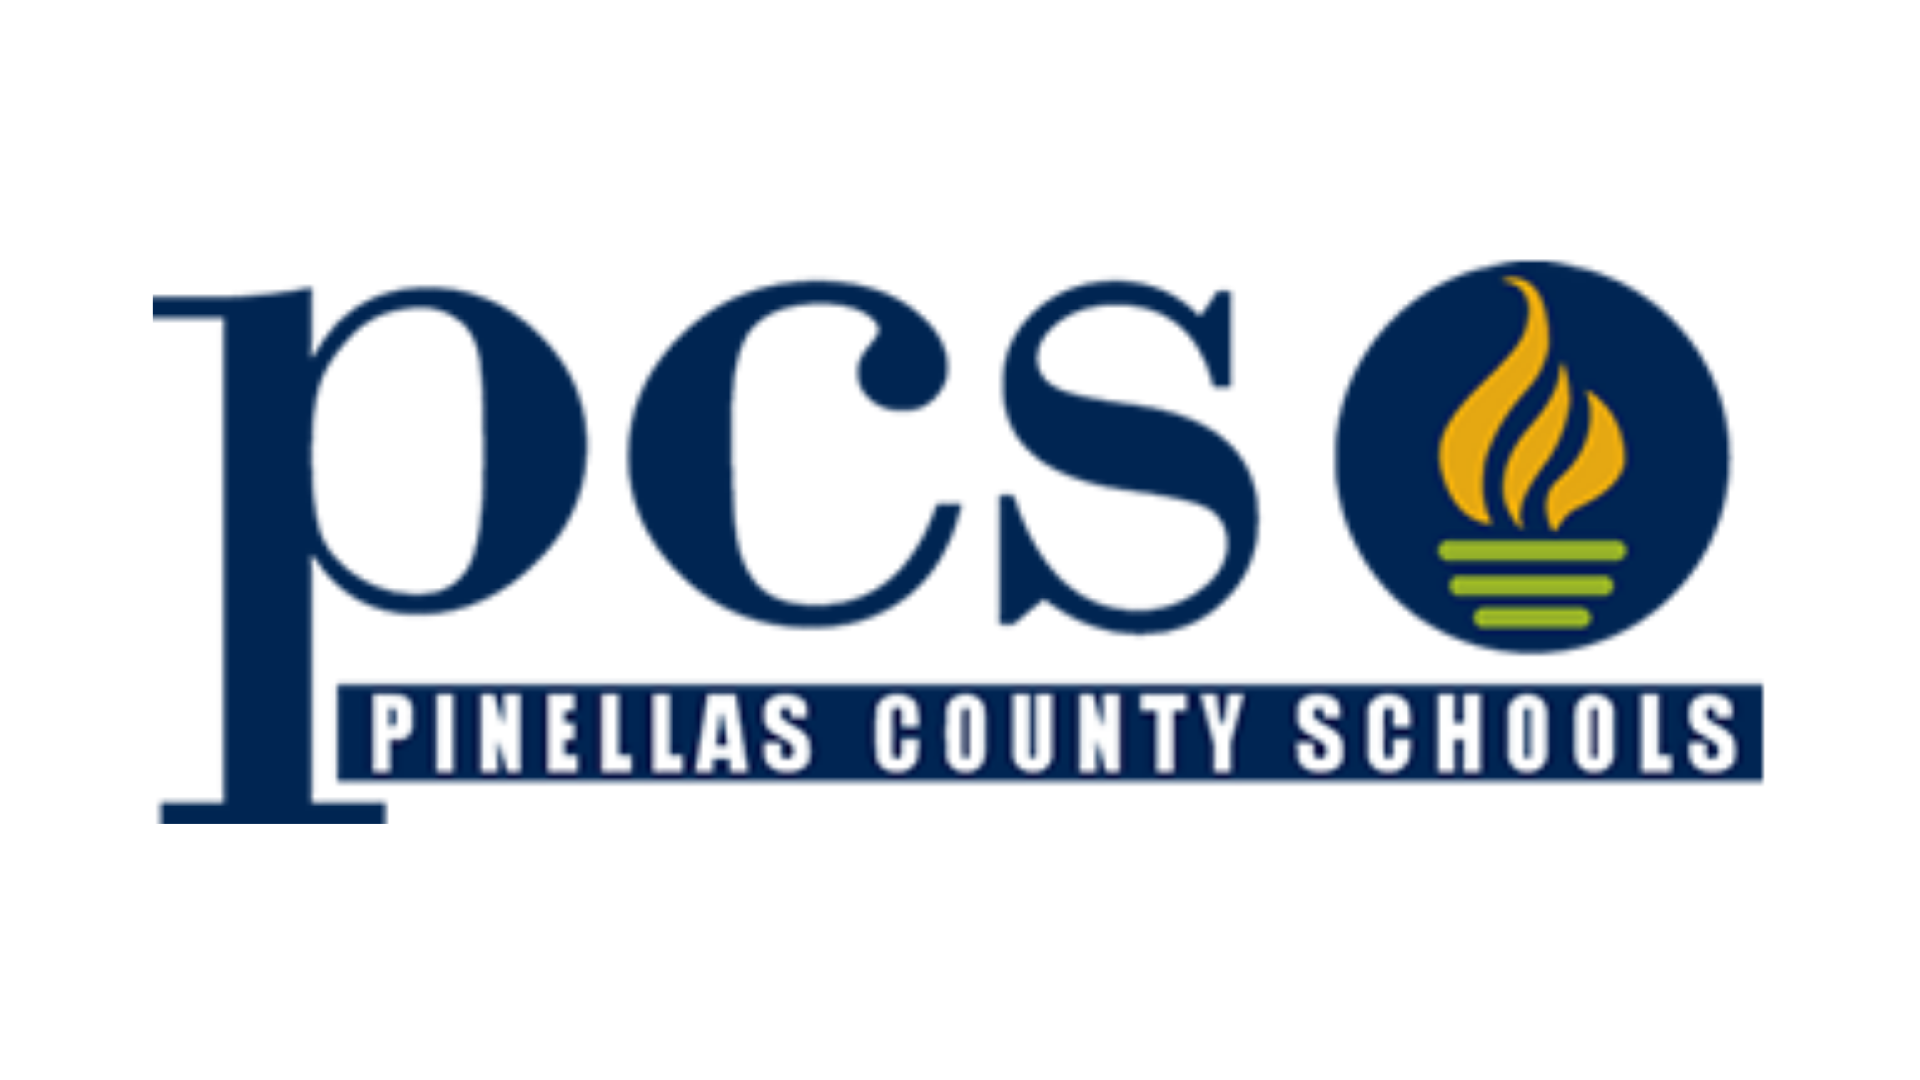 Pinellas County Schools appears to support implementing "Critical Race